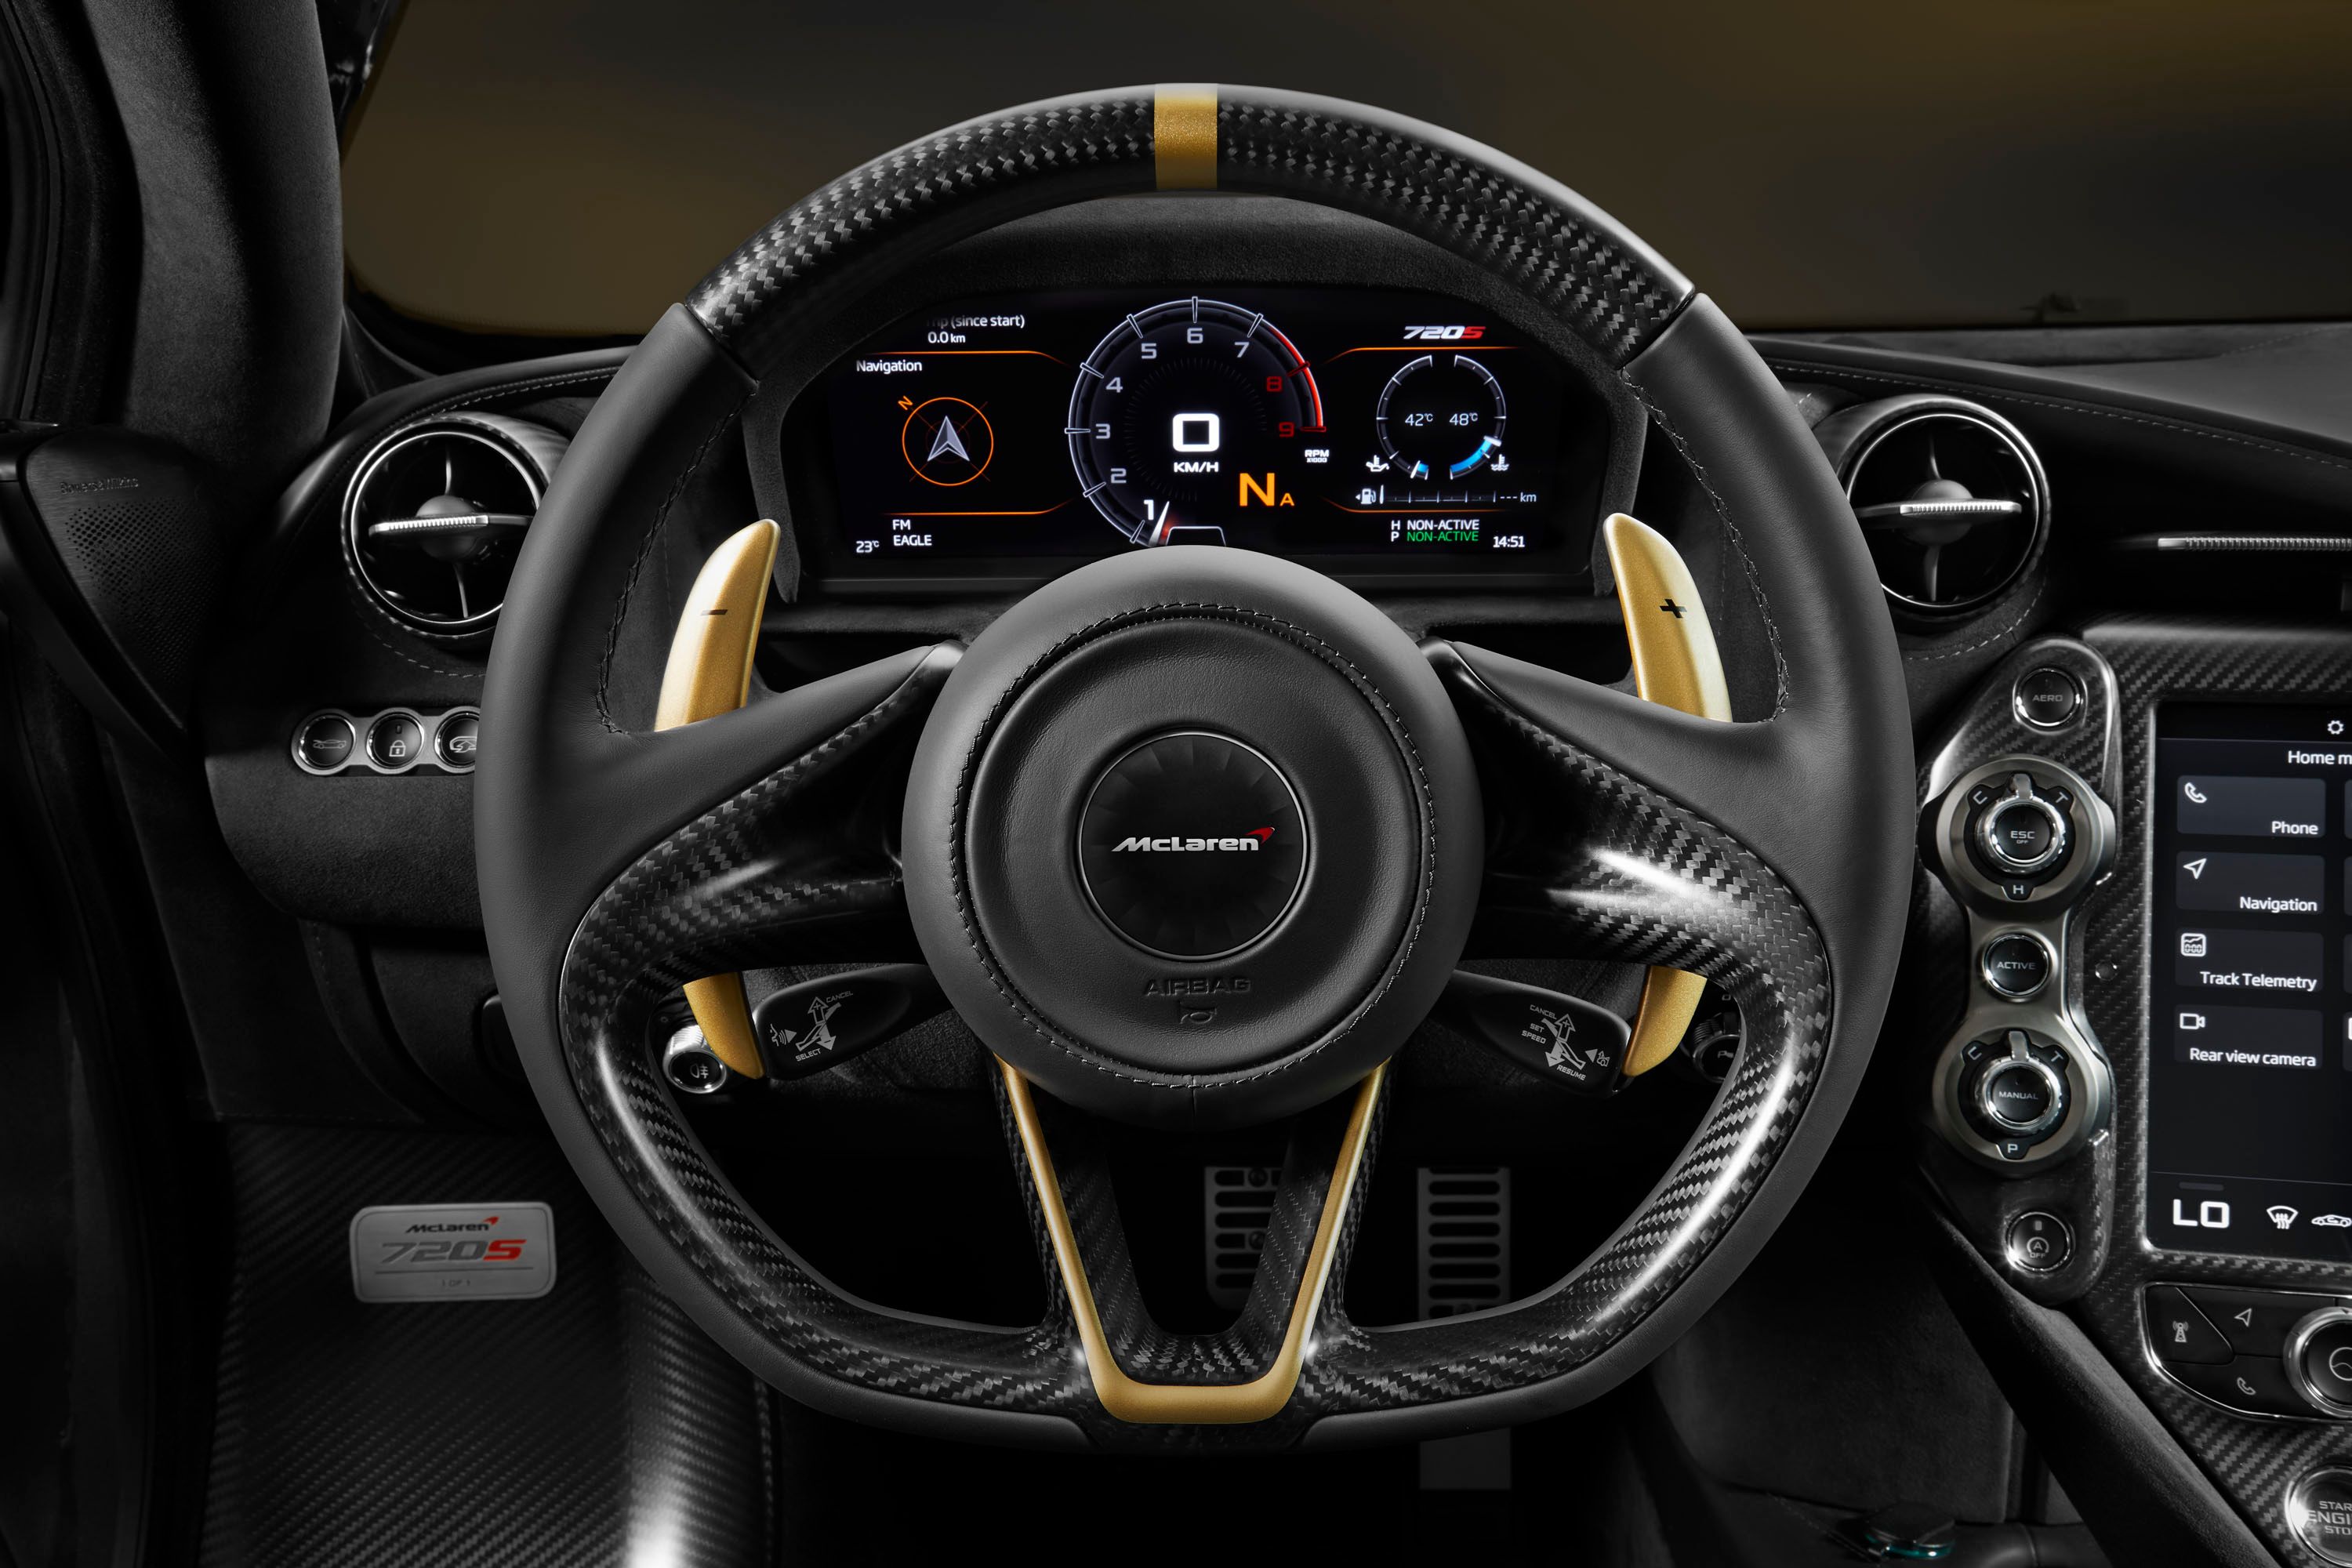 Gold paddle shifters